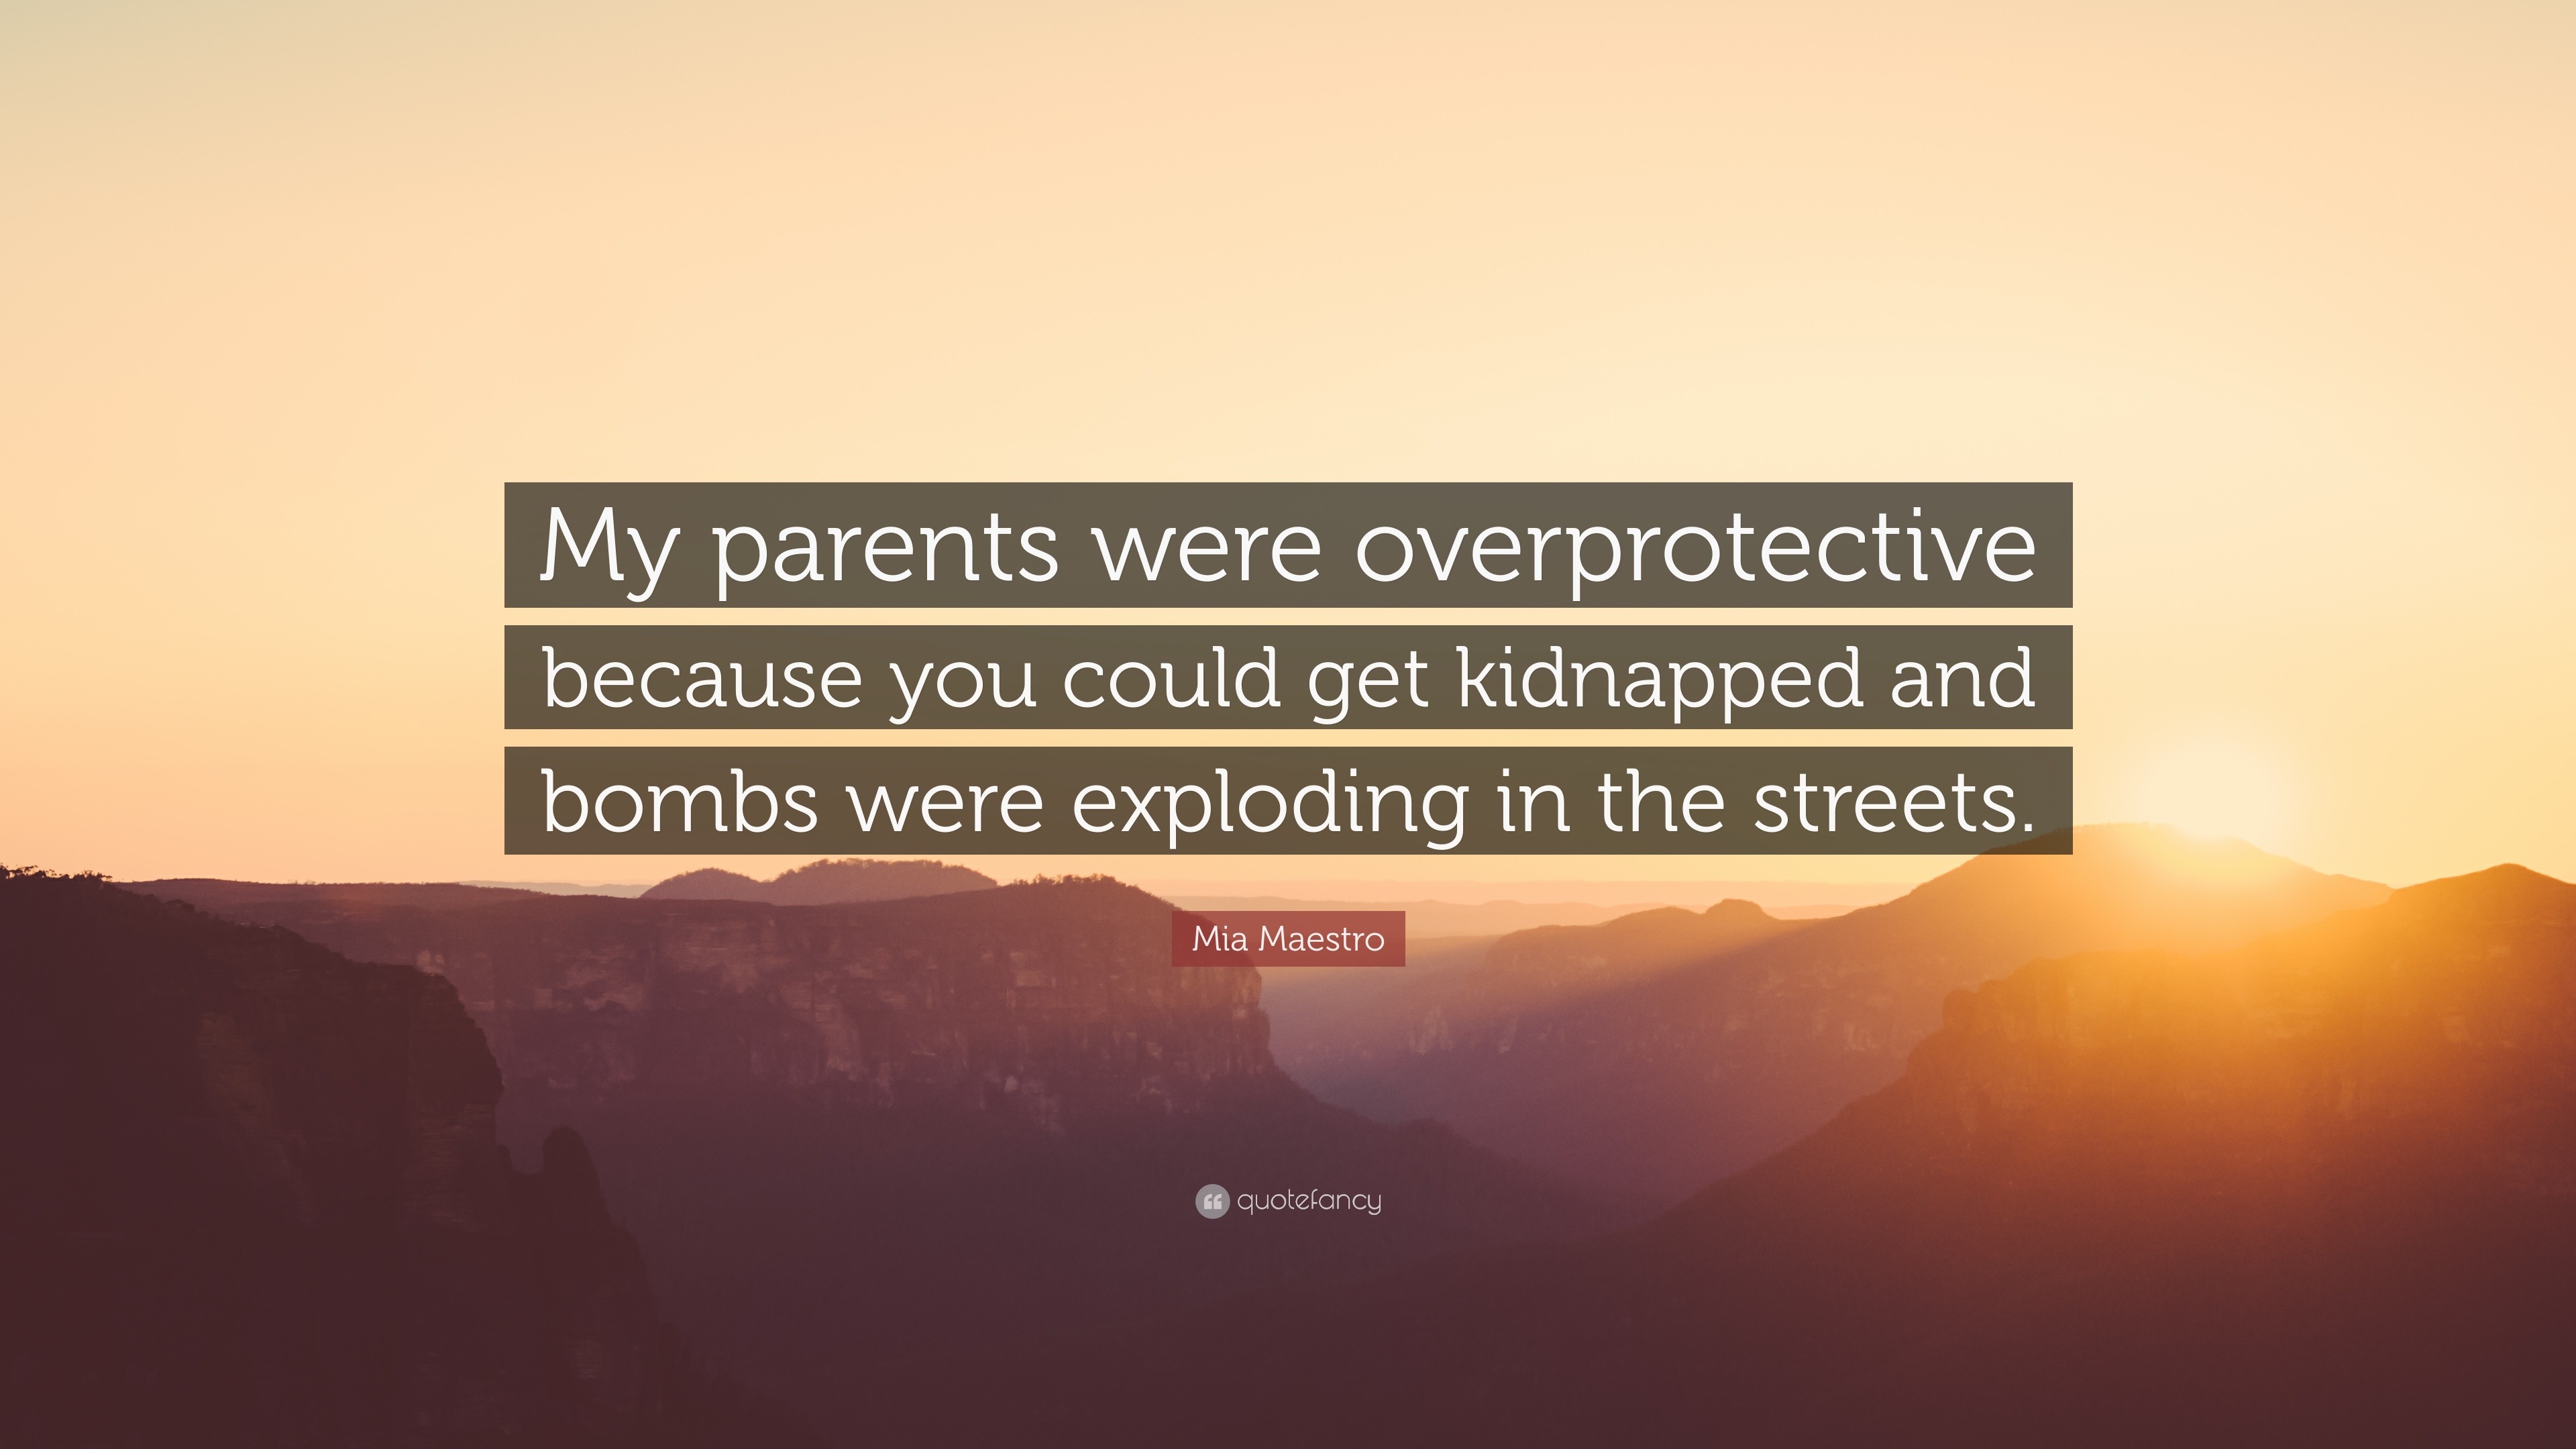 Mia Maestro Quote My Parents Were Overprotective Because You Could Get Kidnapped And Bombs Were Exploding In The Streets 7 Wallpapers Quotefancy They have the utmost sense of care and protectiveness. mia maestro quote my parents were